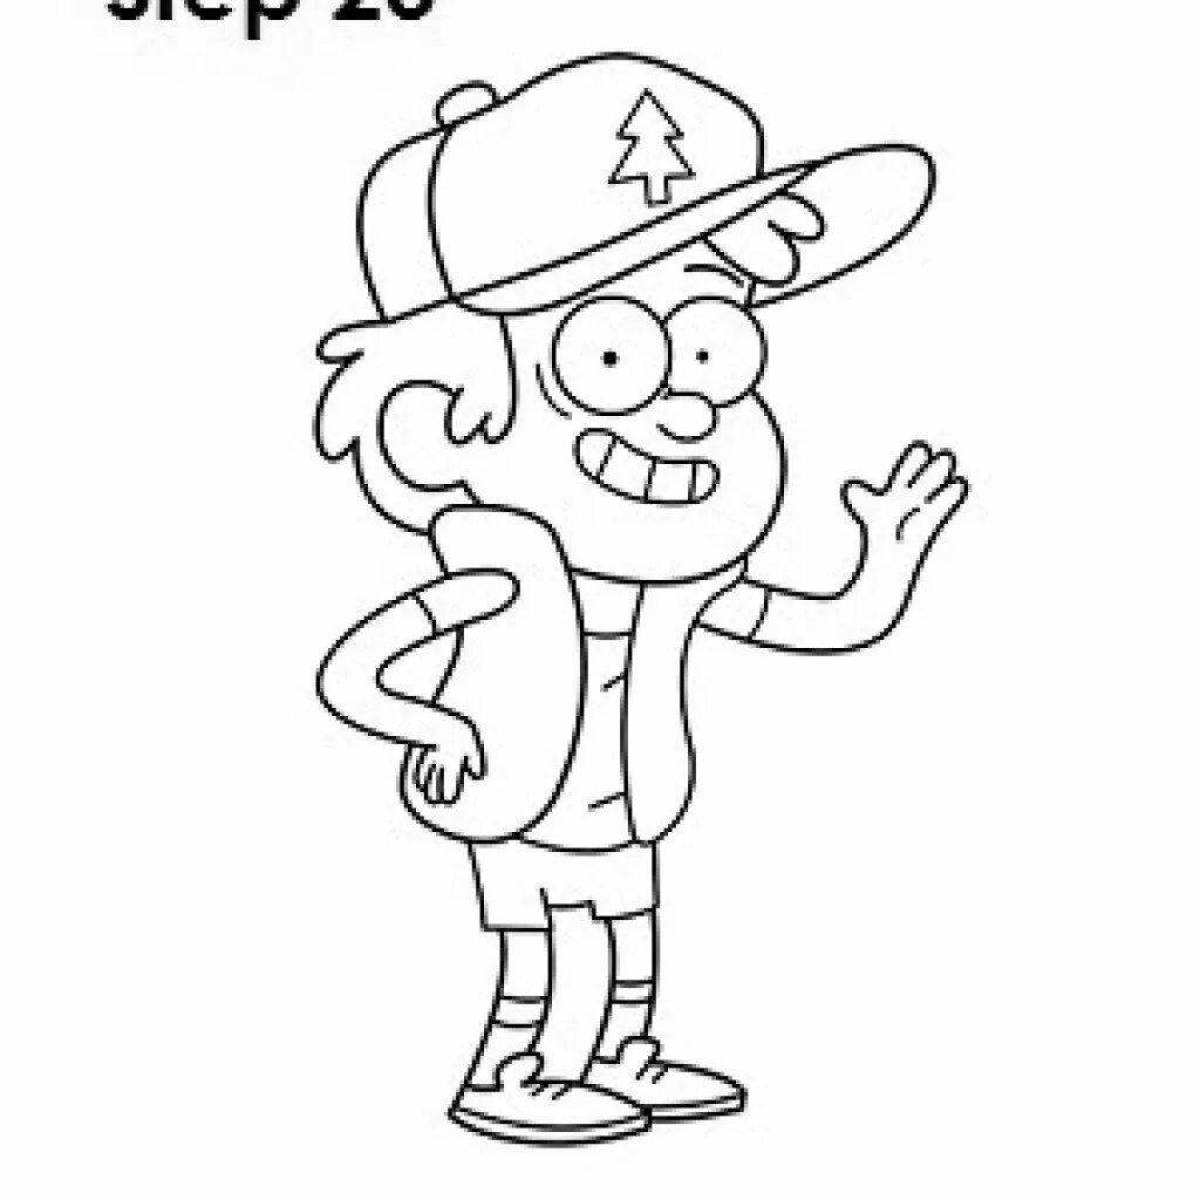 Dipper from gravity falls #5